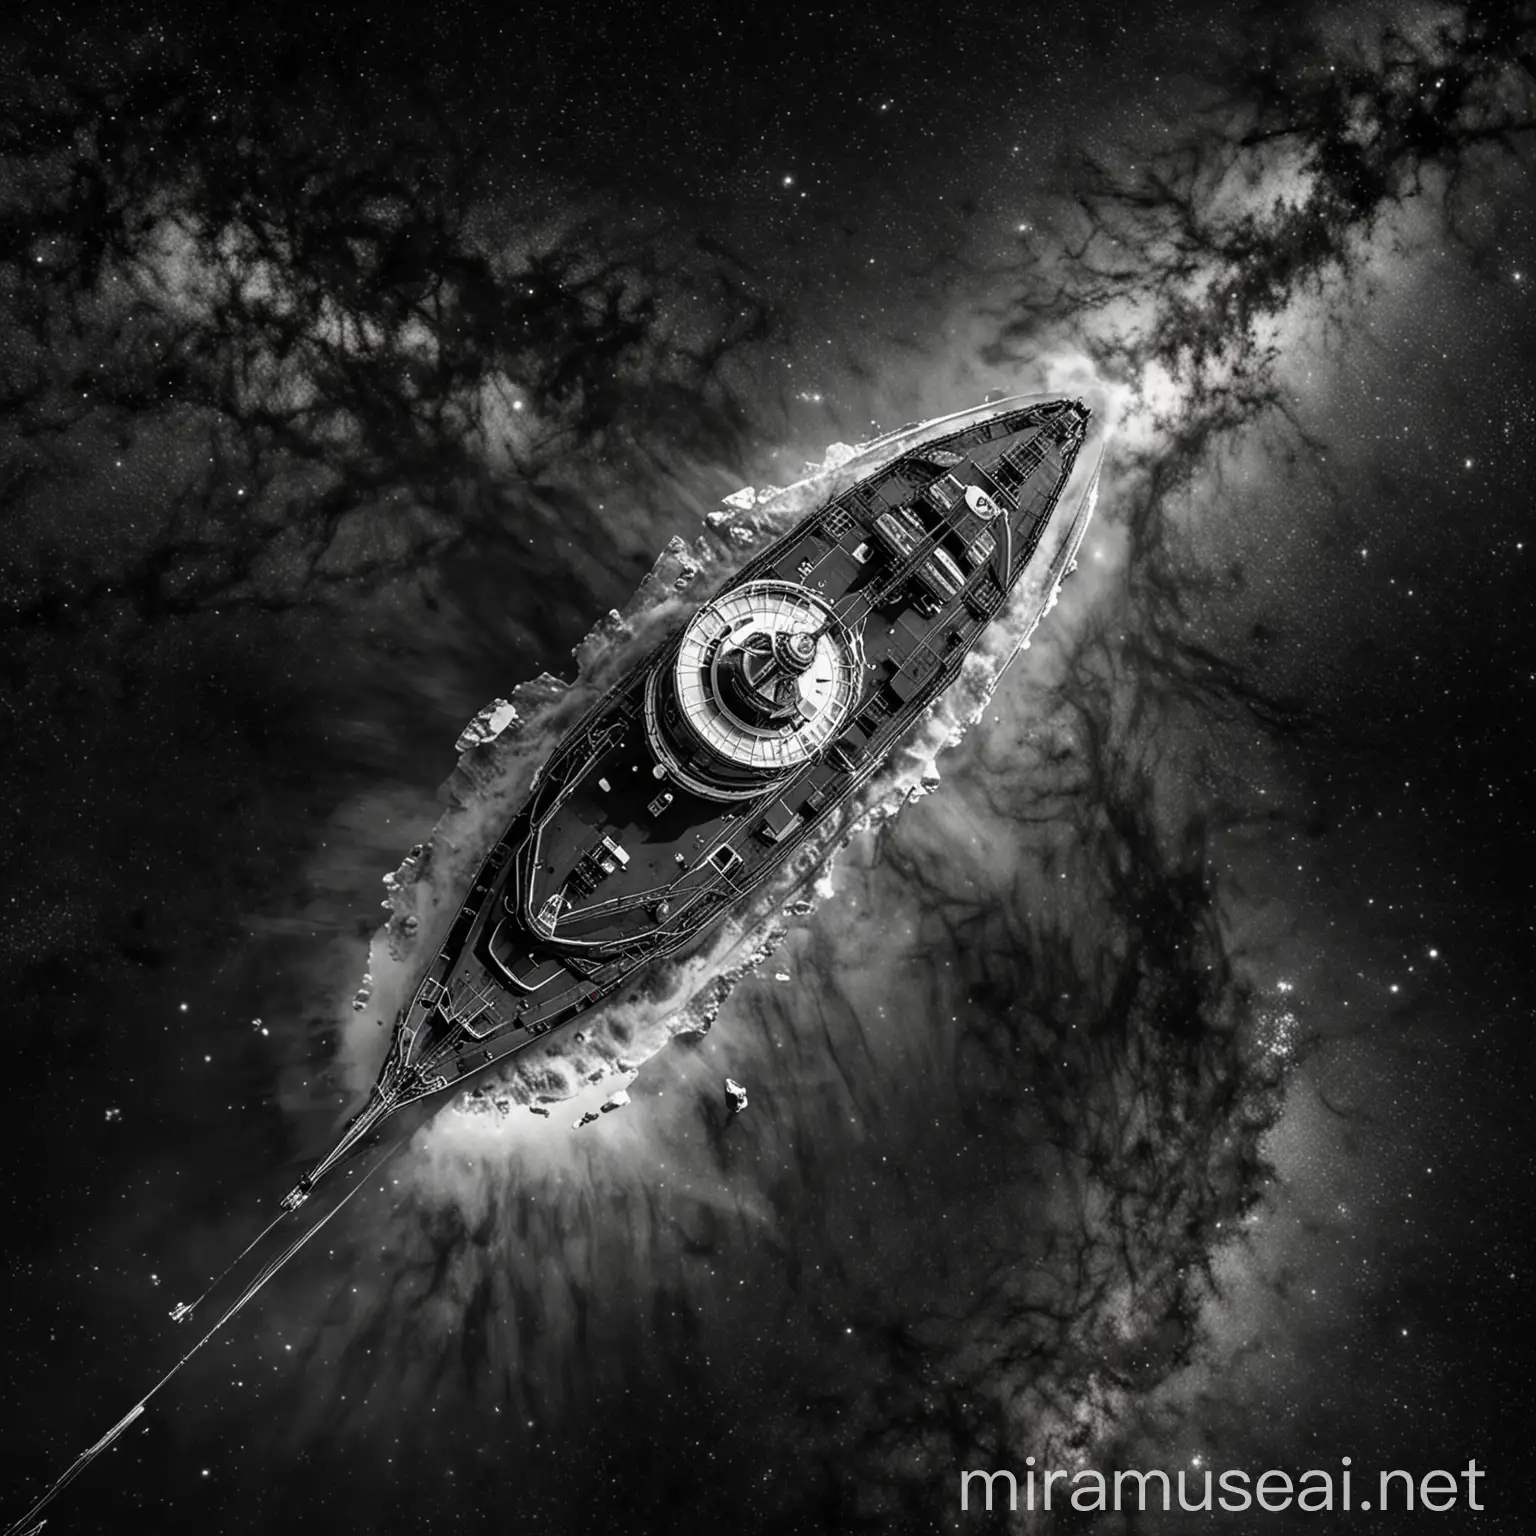 Icebreaker Ship Travelling Through Milky Way in TopView Black and White Illustration